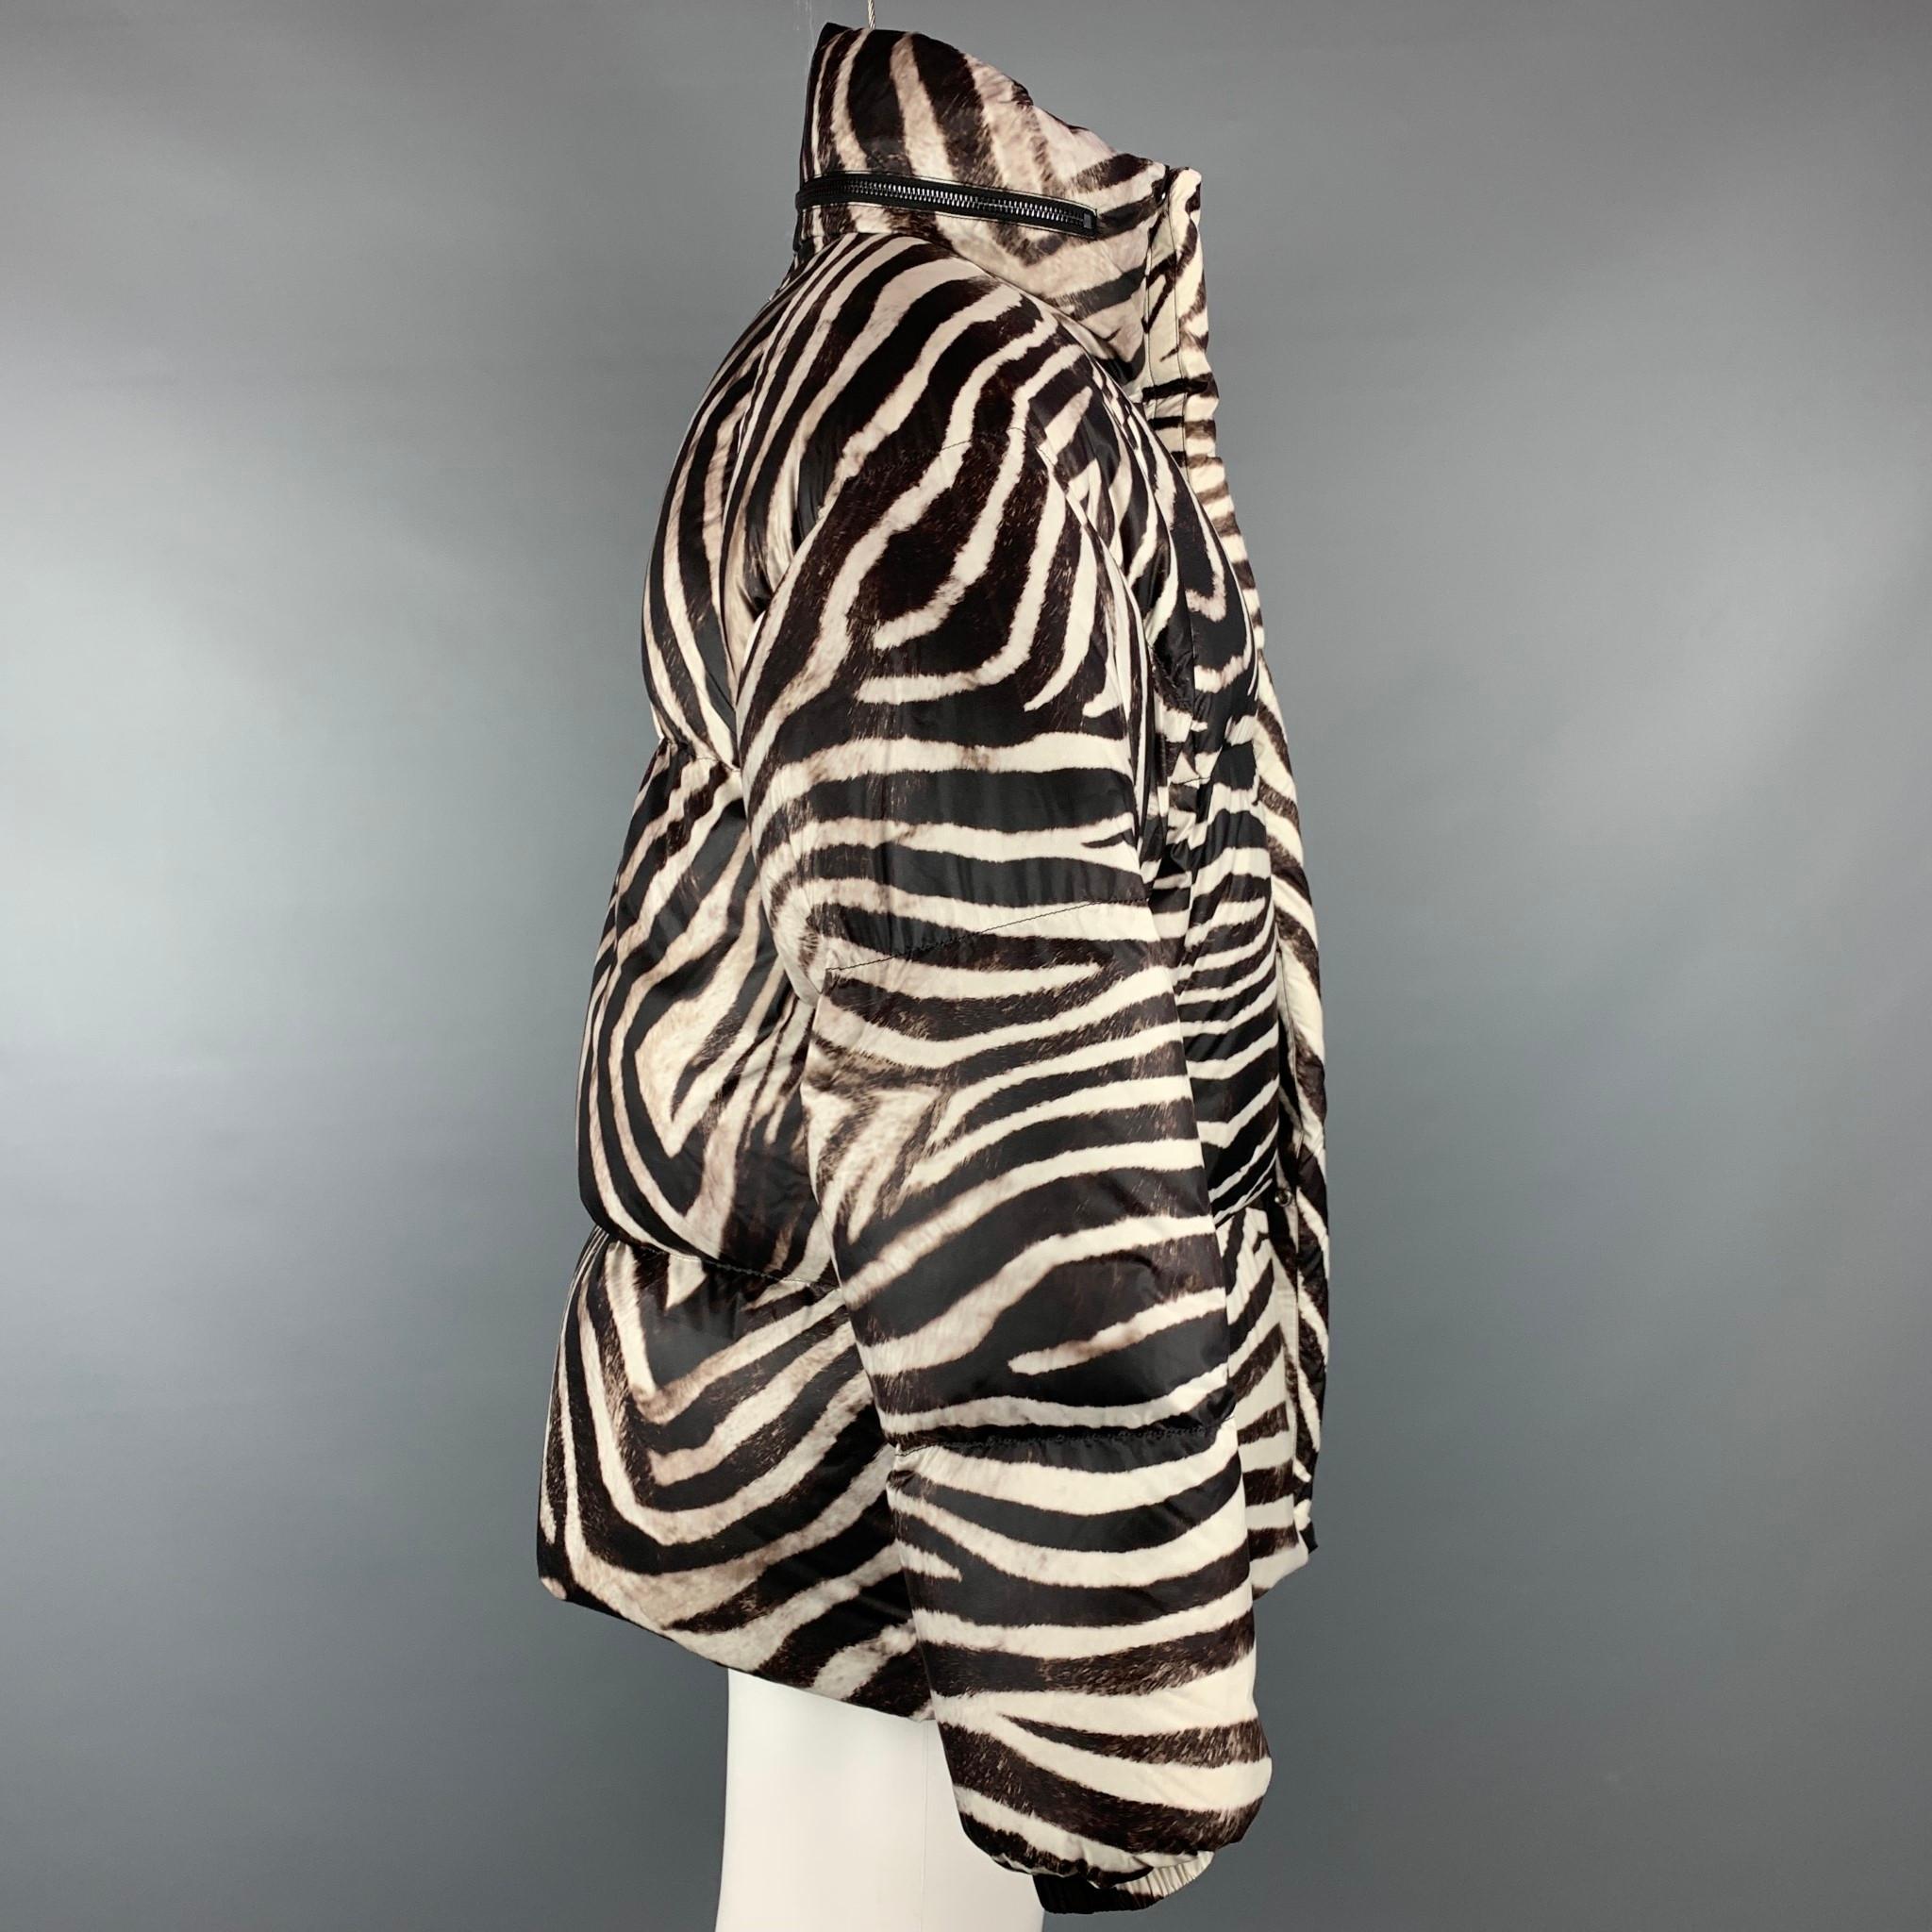 JEAN PAUL GAULTIER x BOSIDENG jacket comes in a brown & white zebra print nylon with goose down filled featuring a puffer style, hooded, slit pockets, sleeve patch detail, and a zip & snap button closure.

Excellent Pre-Owned Condition.
Marked: